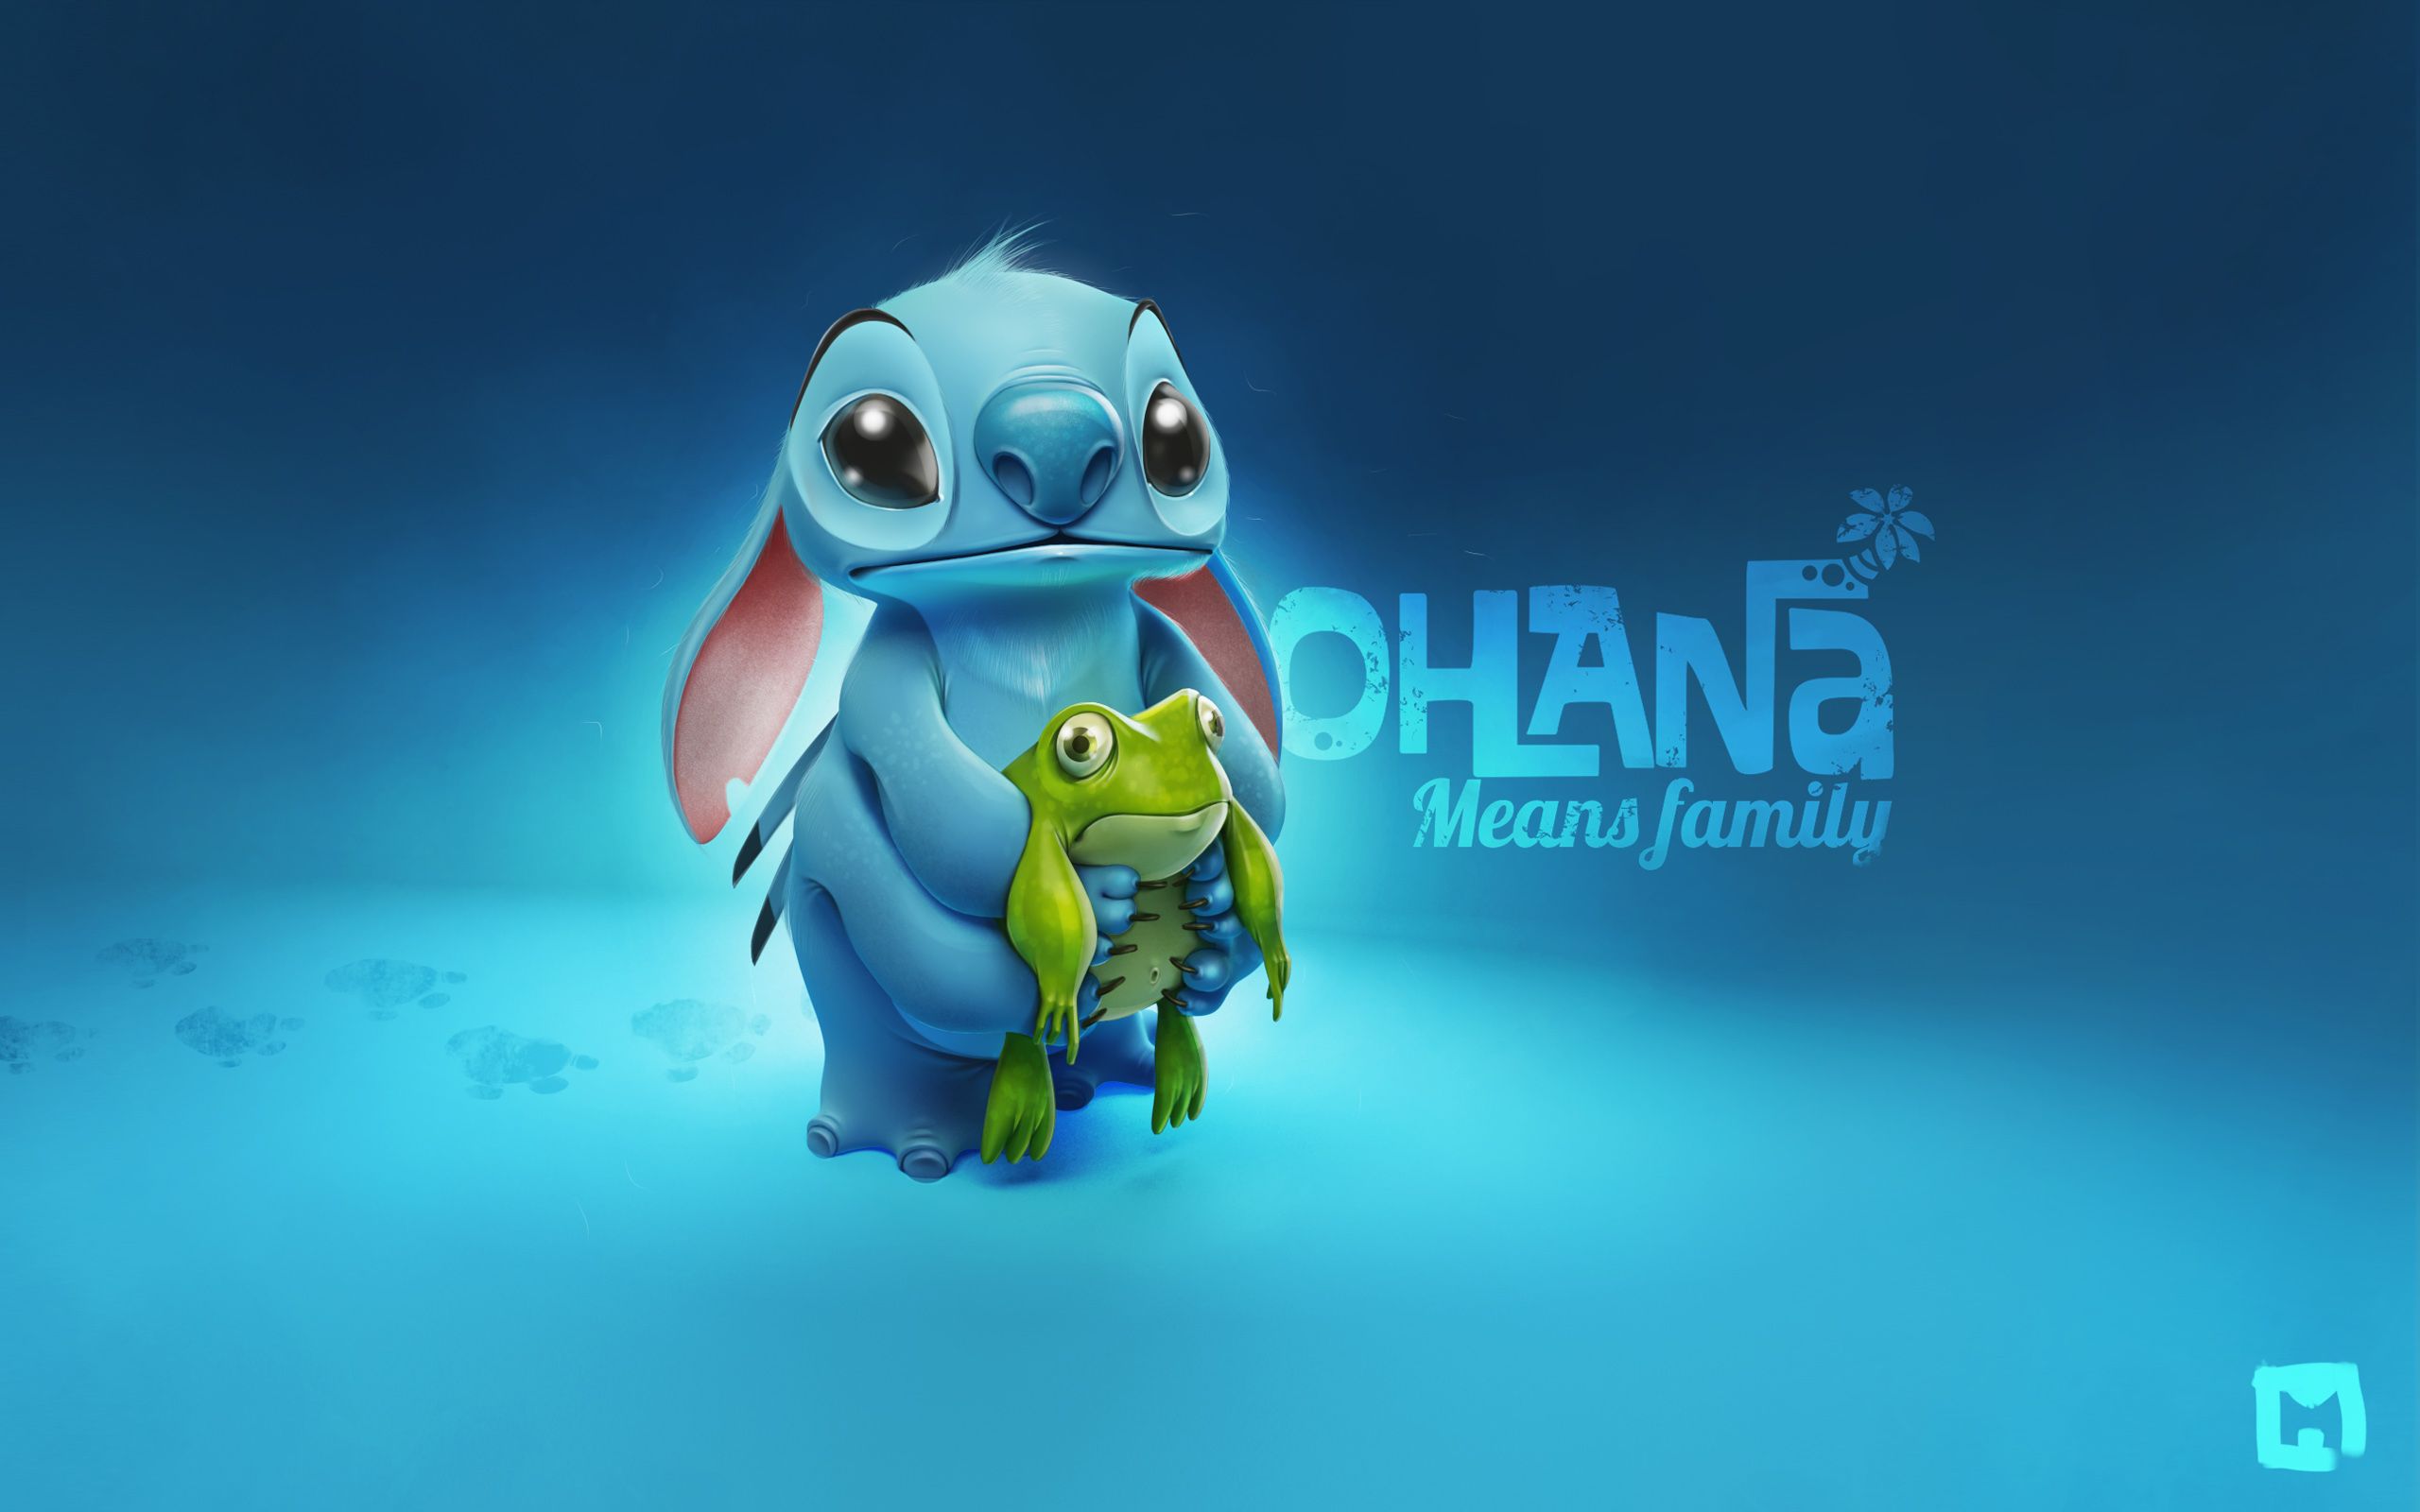 Lilo And Stich Wallpapers - Wallpaper Cave